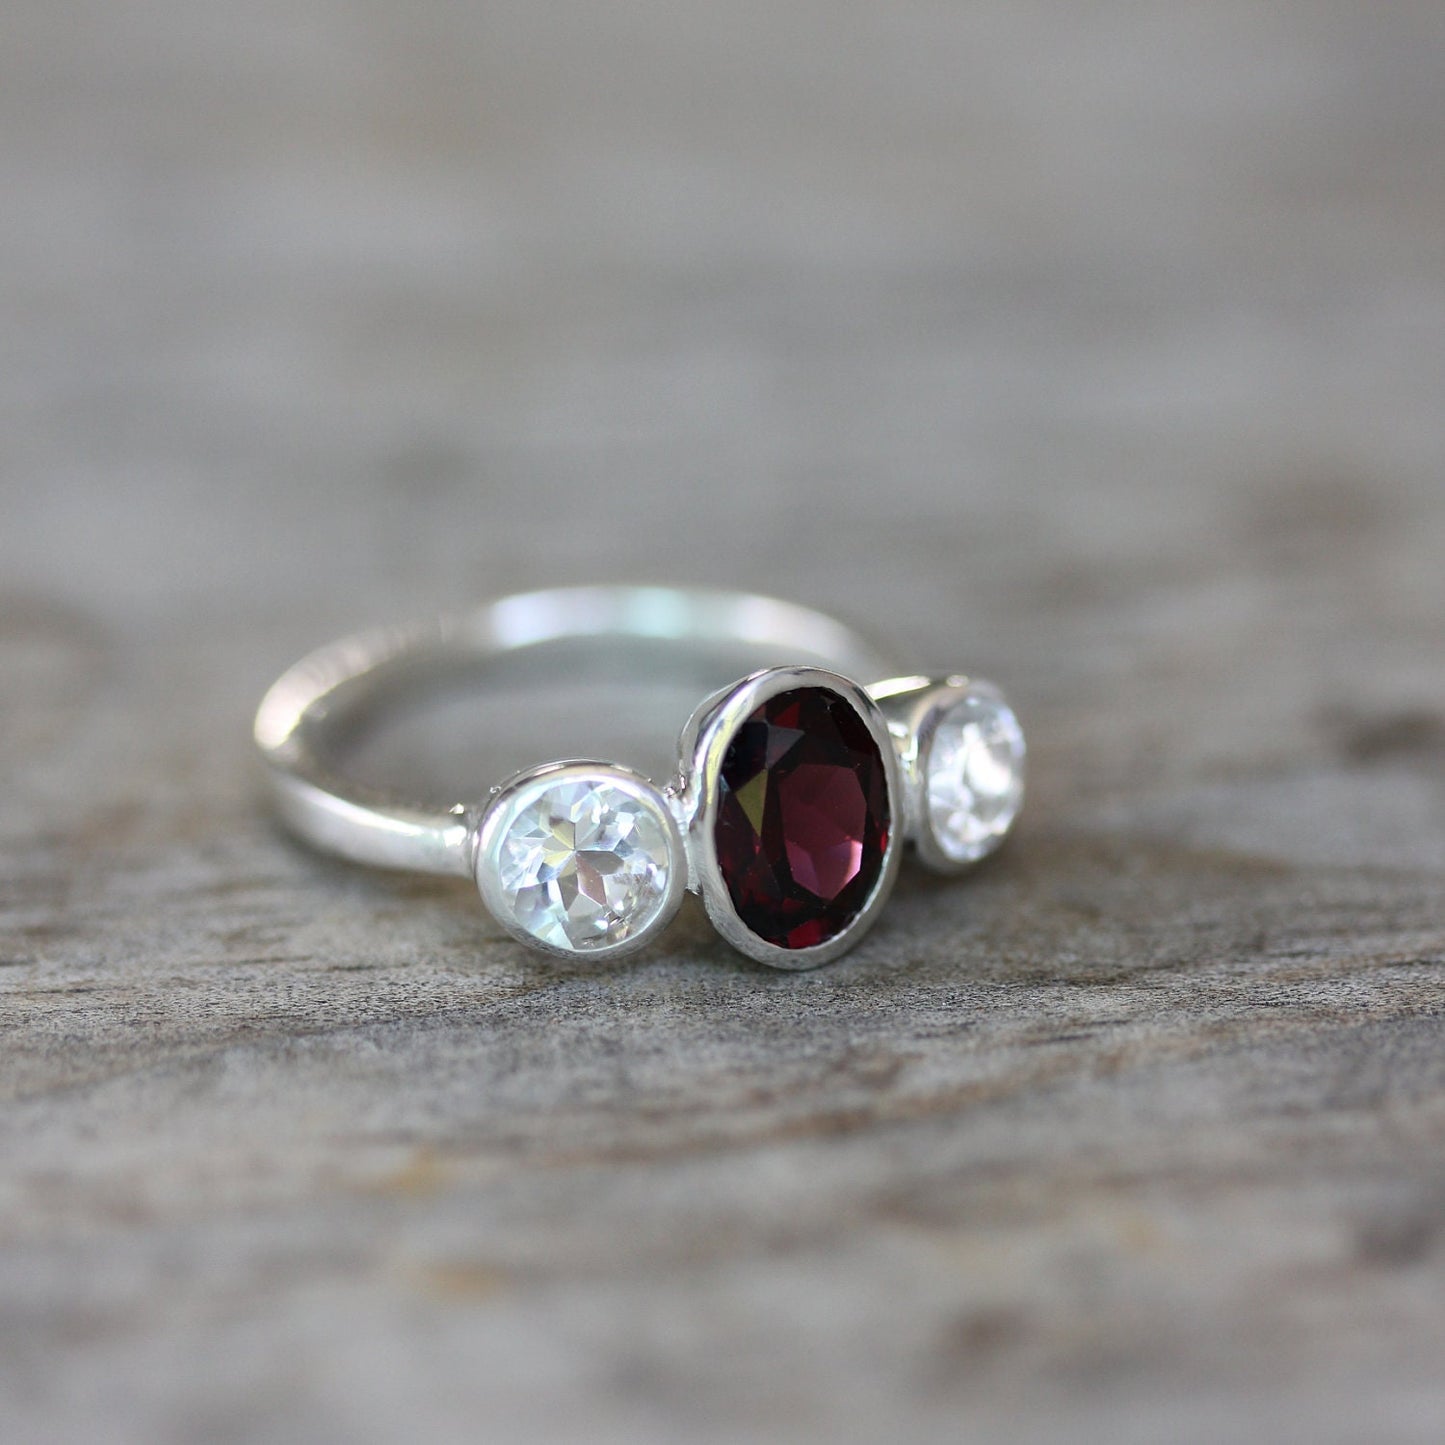 A Pink Garnet Ring with white diamonds, handmade by Cassin Jewelry.